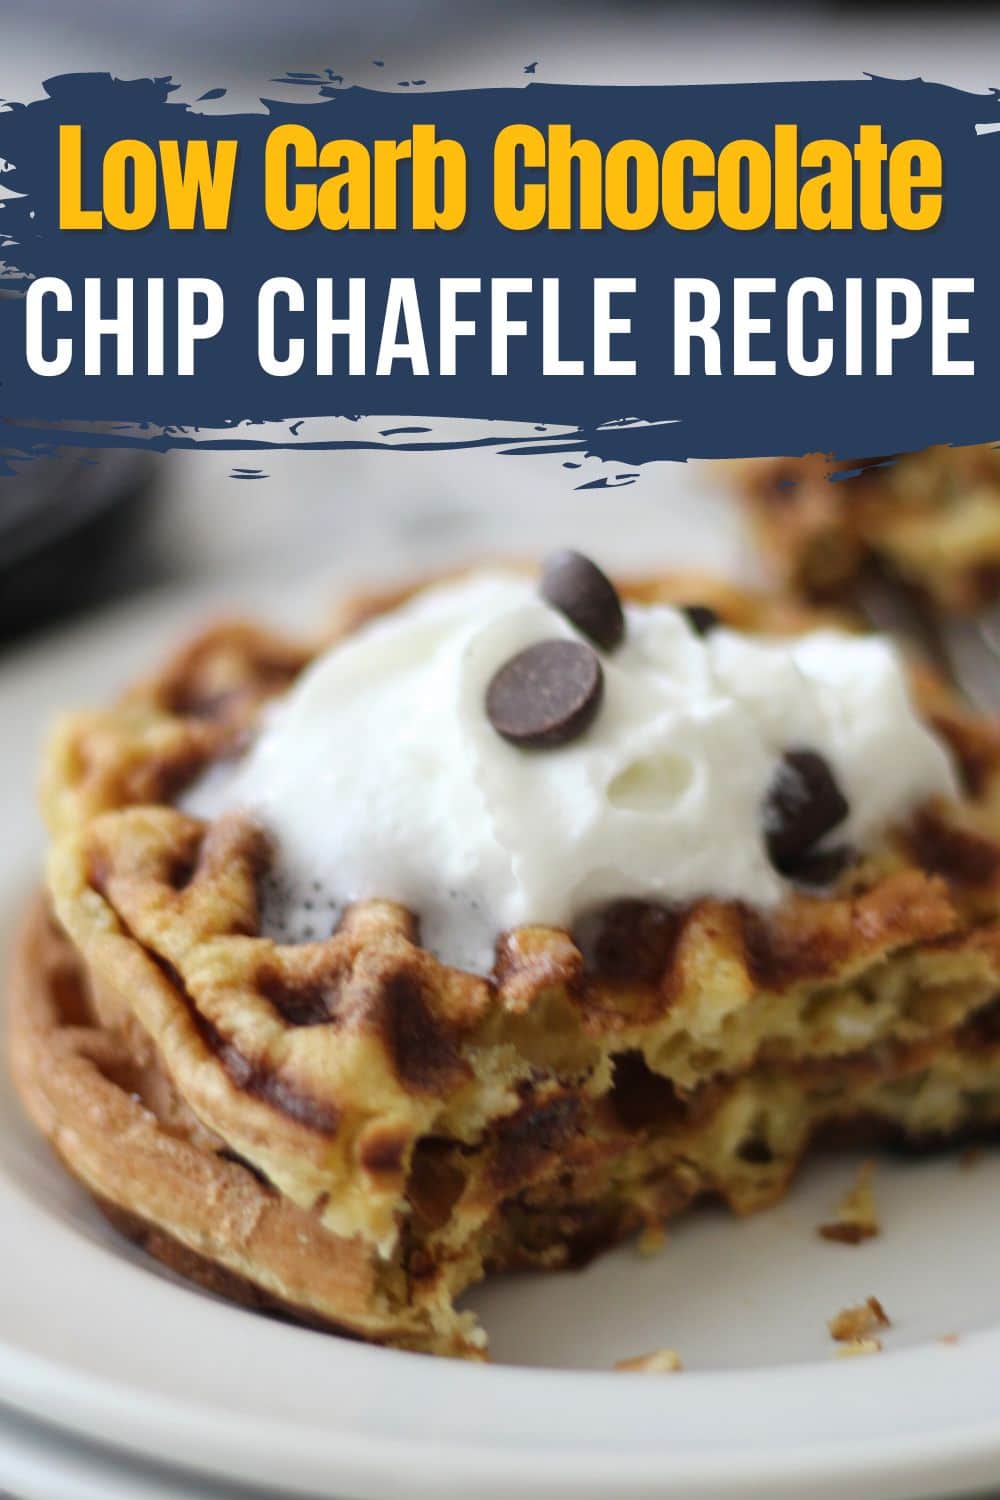 A diagonally shot stack of two chaffles topped with whipped cream and chocolate chips. Golden brown chaffles have chocolate chips baked in and are cut partway to reveal the fluffy interior. Overlaid text reads “Low Carb Chocolate Chip Chaffle Recipe”. The rich chocolate chaffles and bright toppings are attractively arranged with some depth of field. This hero image entices readers with the luscious chocolate chip chaffle recipe from the blog.